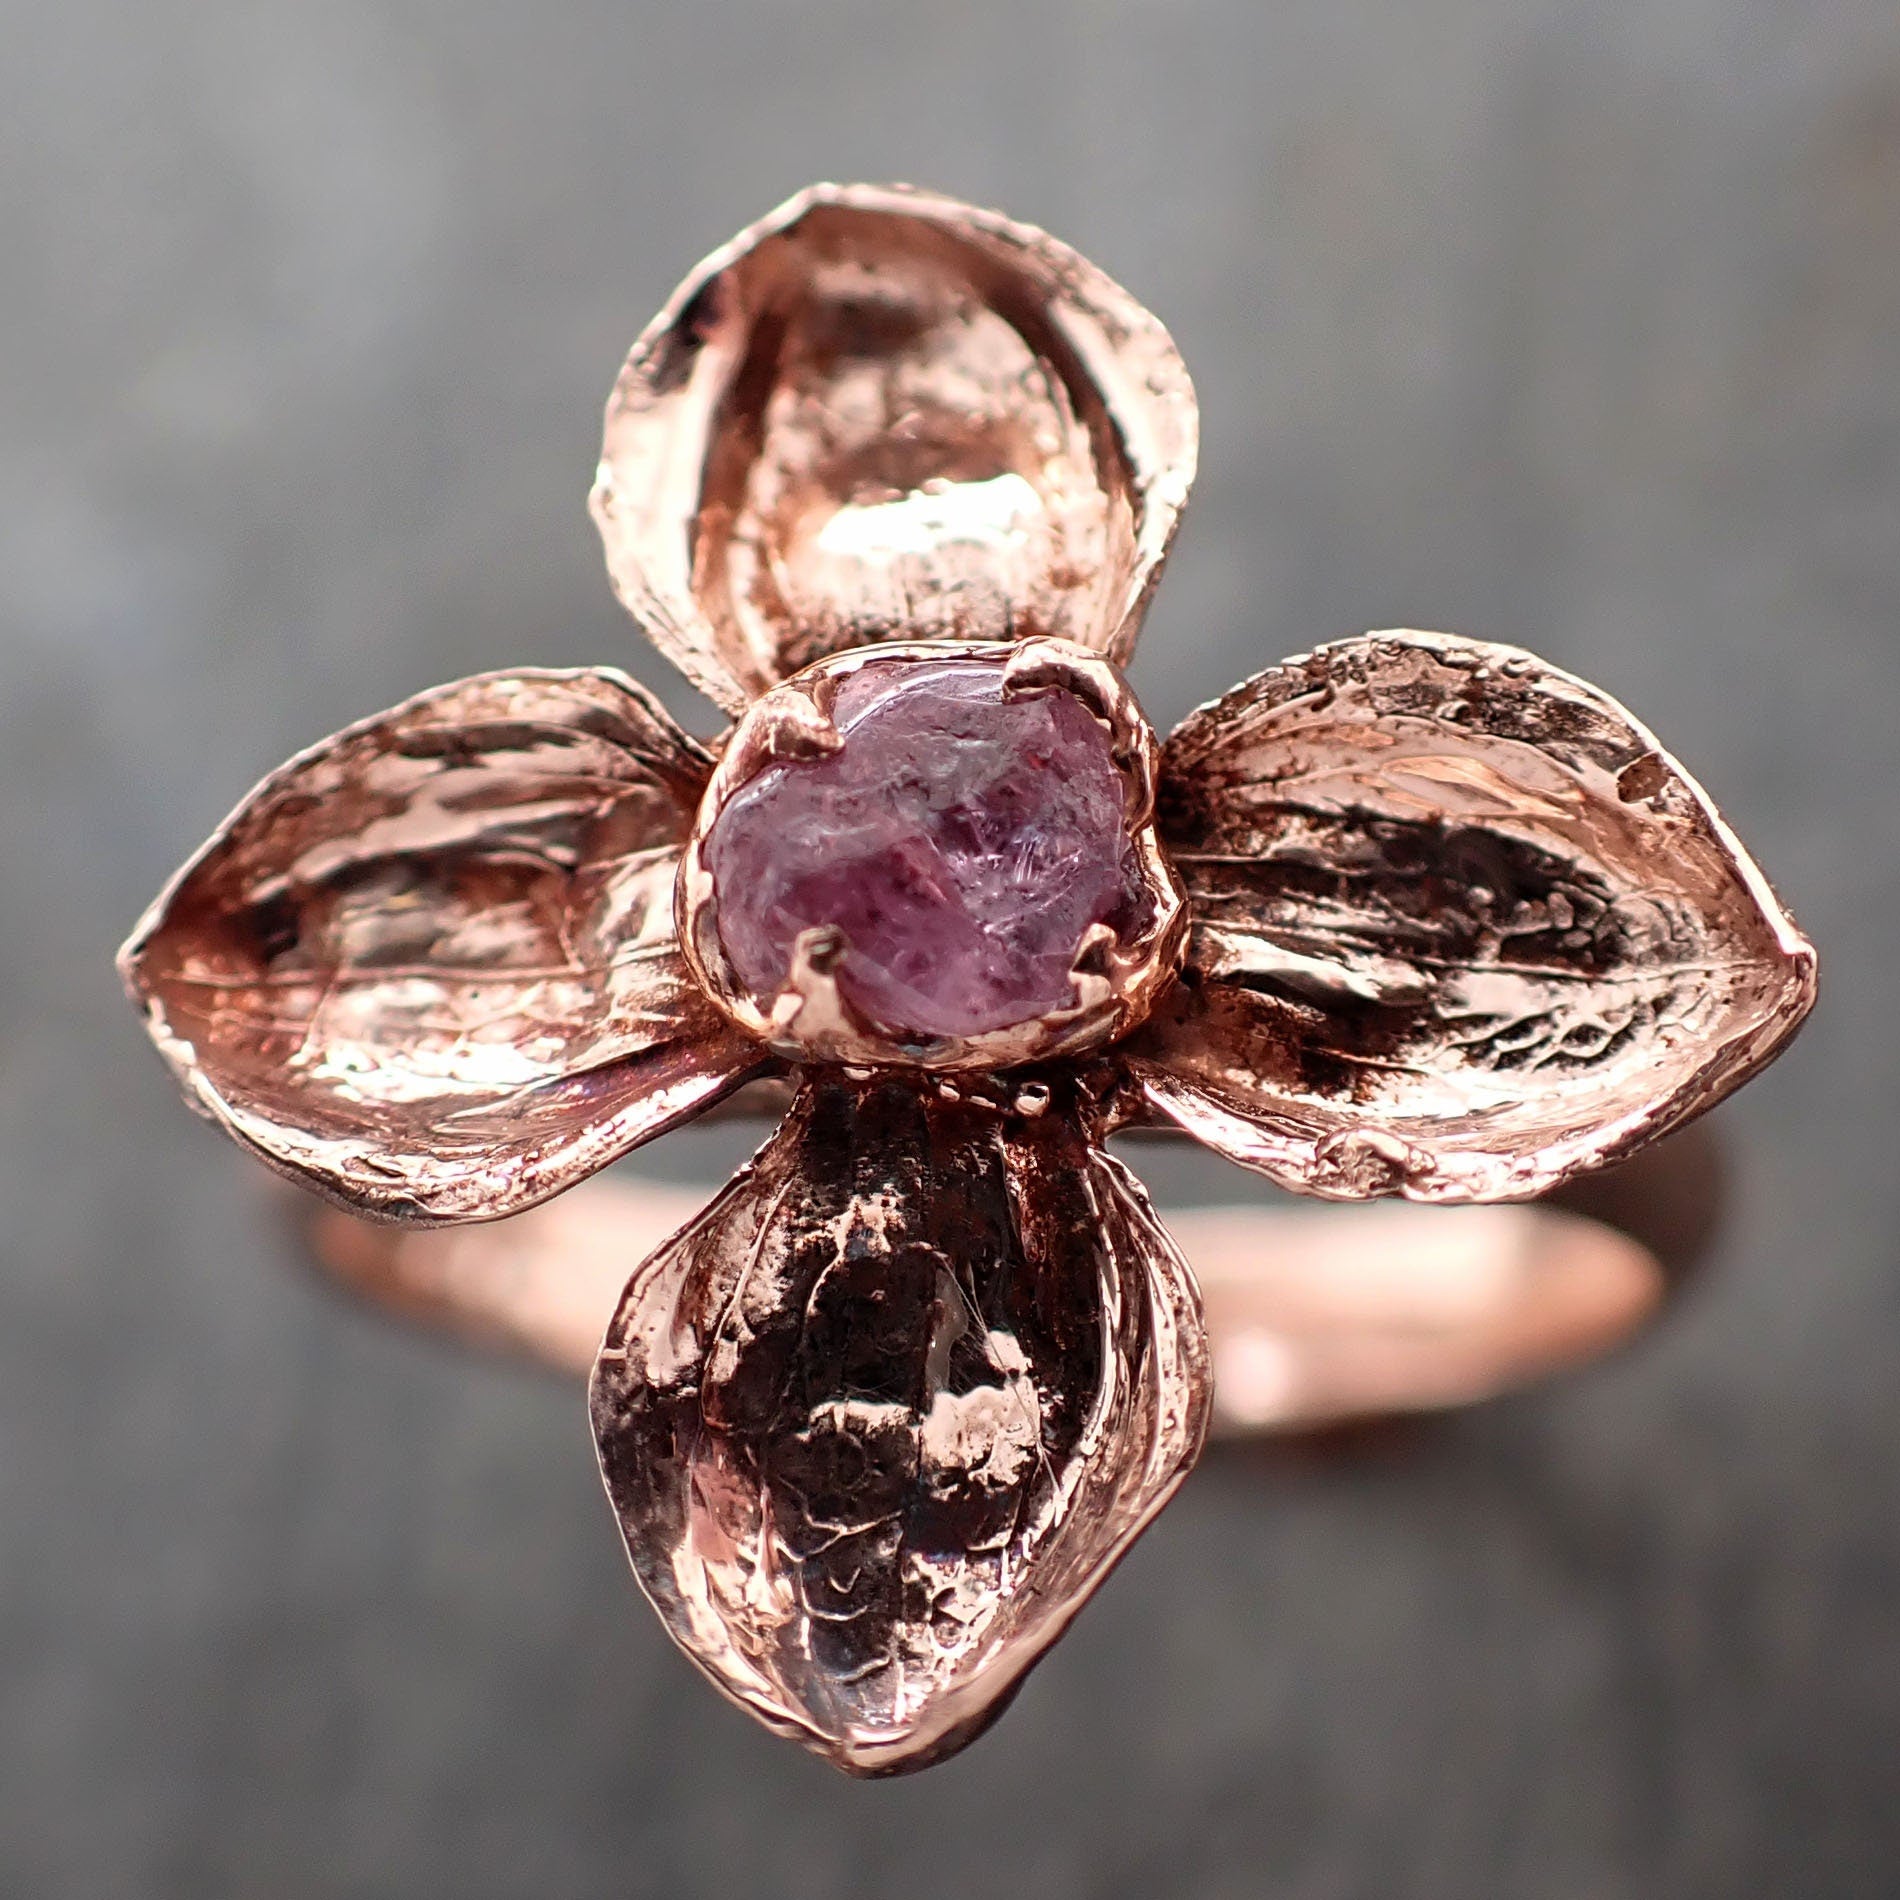 Real Flower and pink Sapphire 14k Rose gold wedding engagement ring Enchanted Garden Floral Ring byAngeline 2972